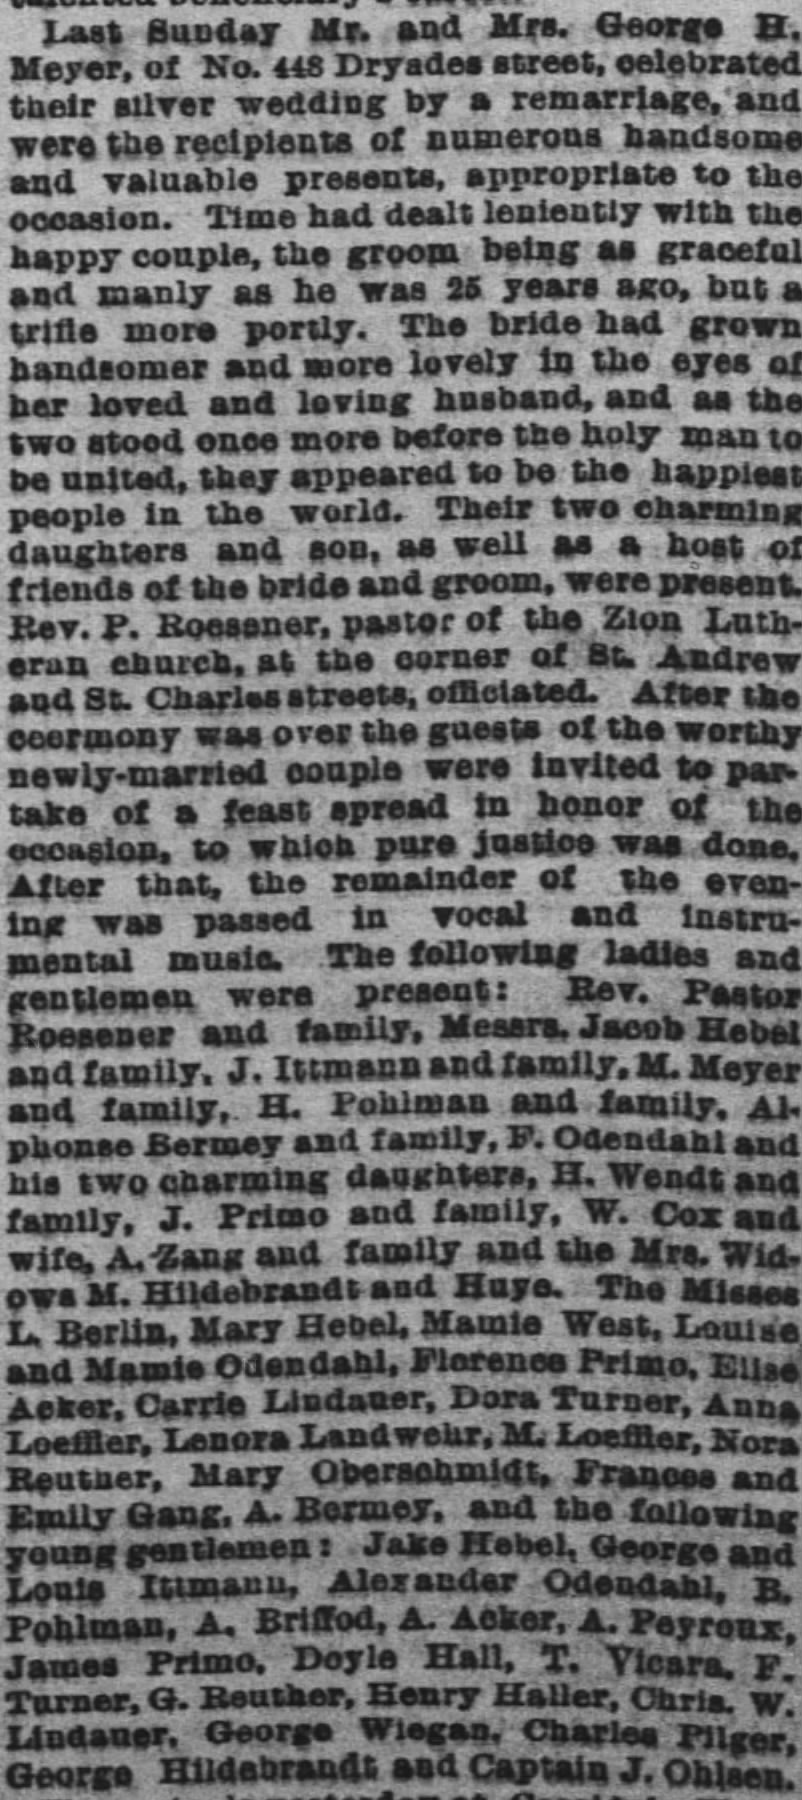 Mr. & Mrs. George H. Mayer celebrate 25th anniversary with a remarriage.  03/25/1888